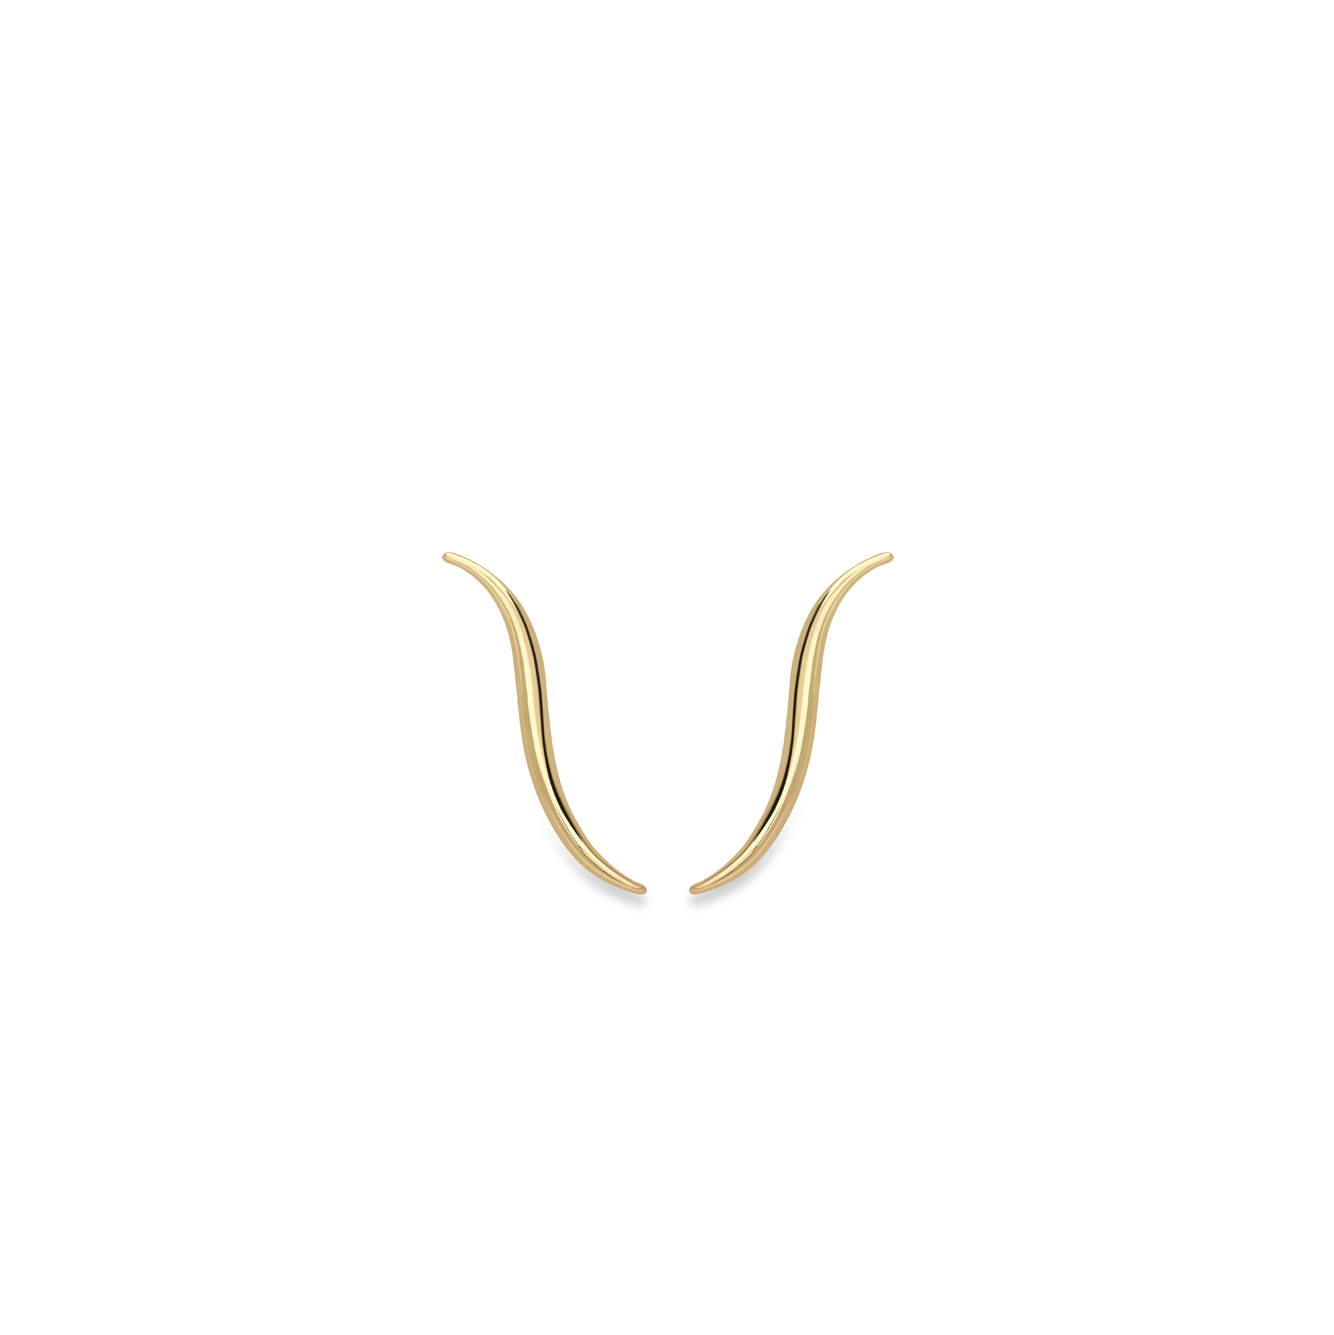 9ct. Yellow Gold Elongated S Earrings